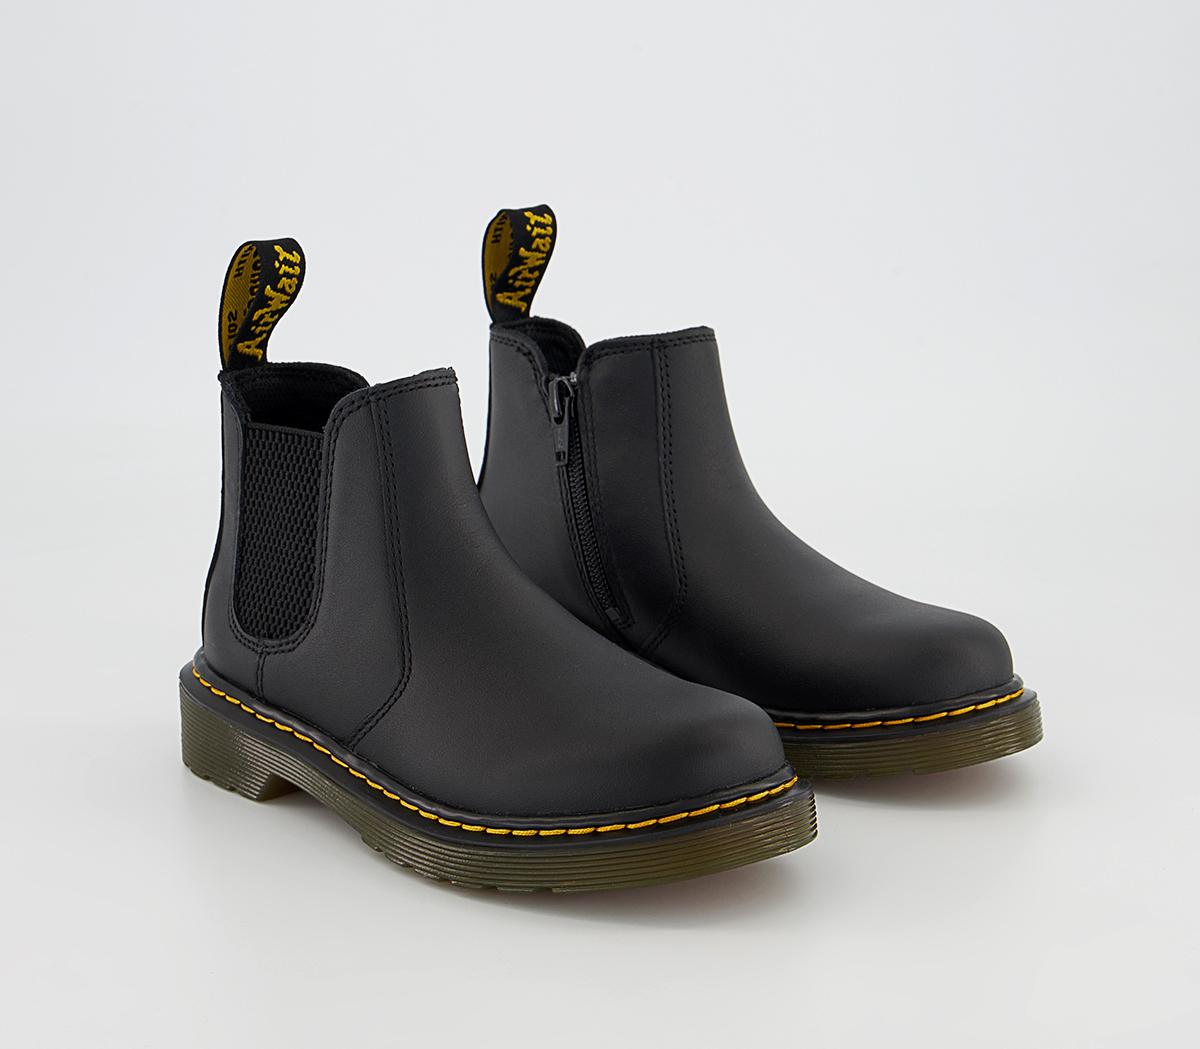 Dr. Martens 2976 Junior Chelsea Boots Black - Mother's Day Gift Guide